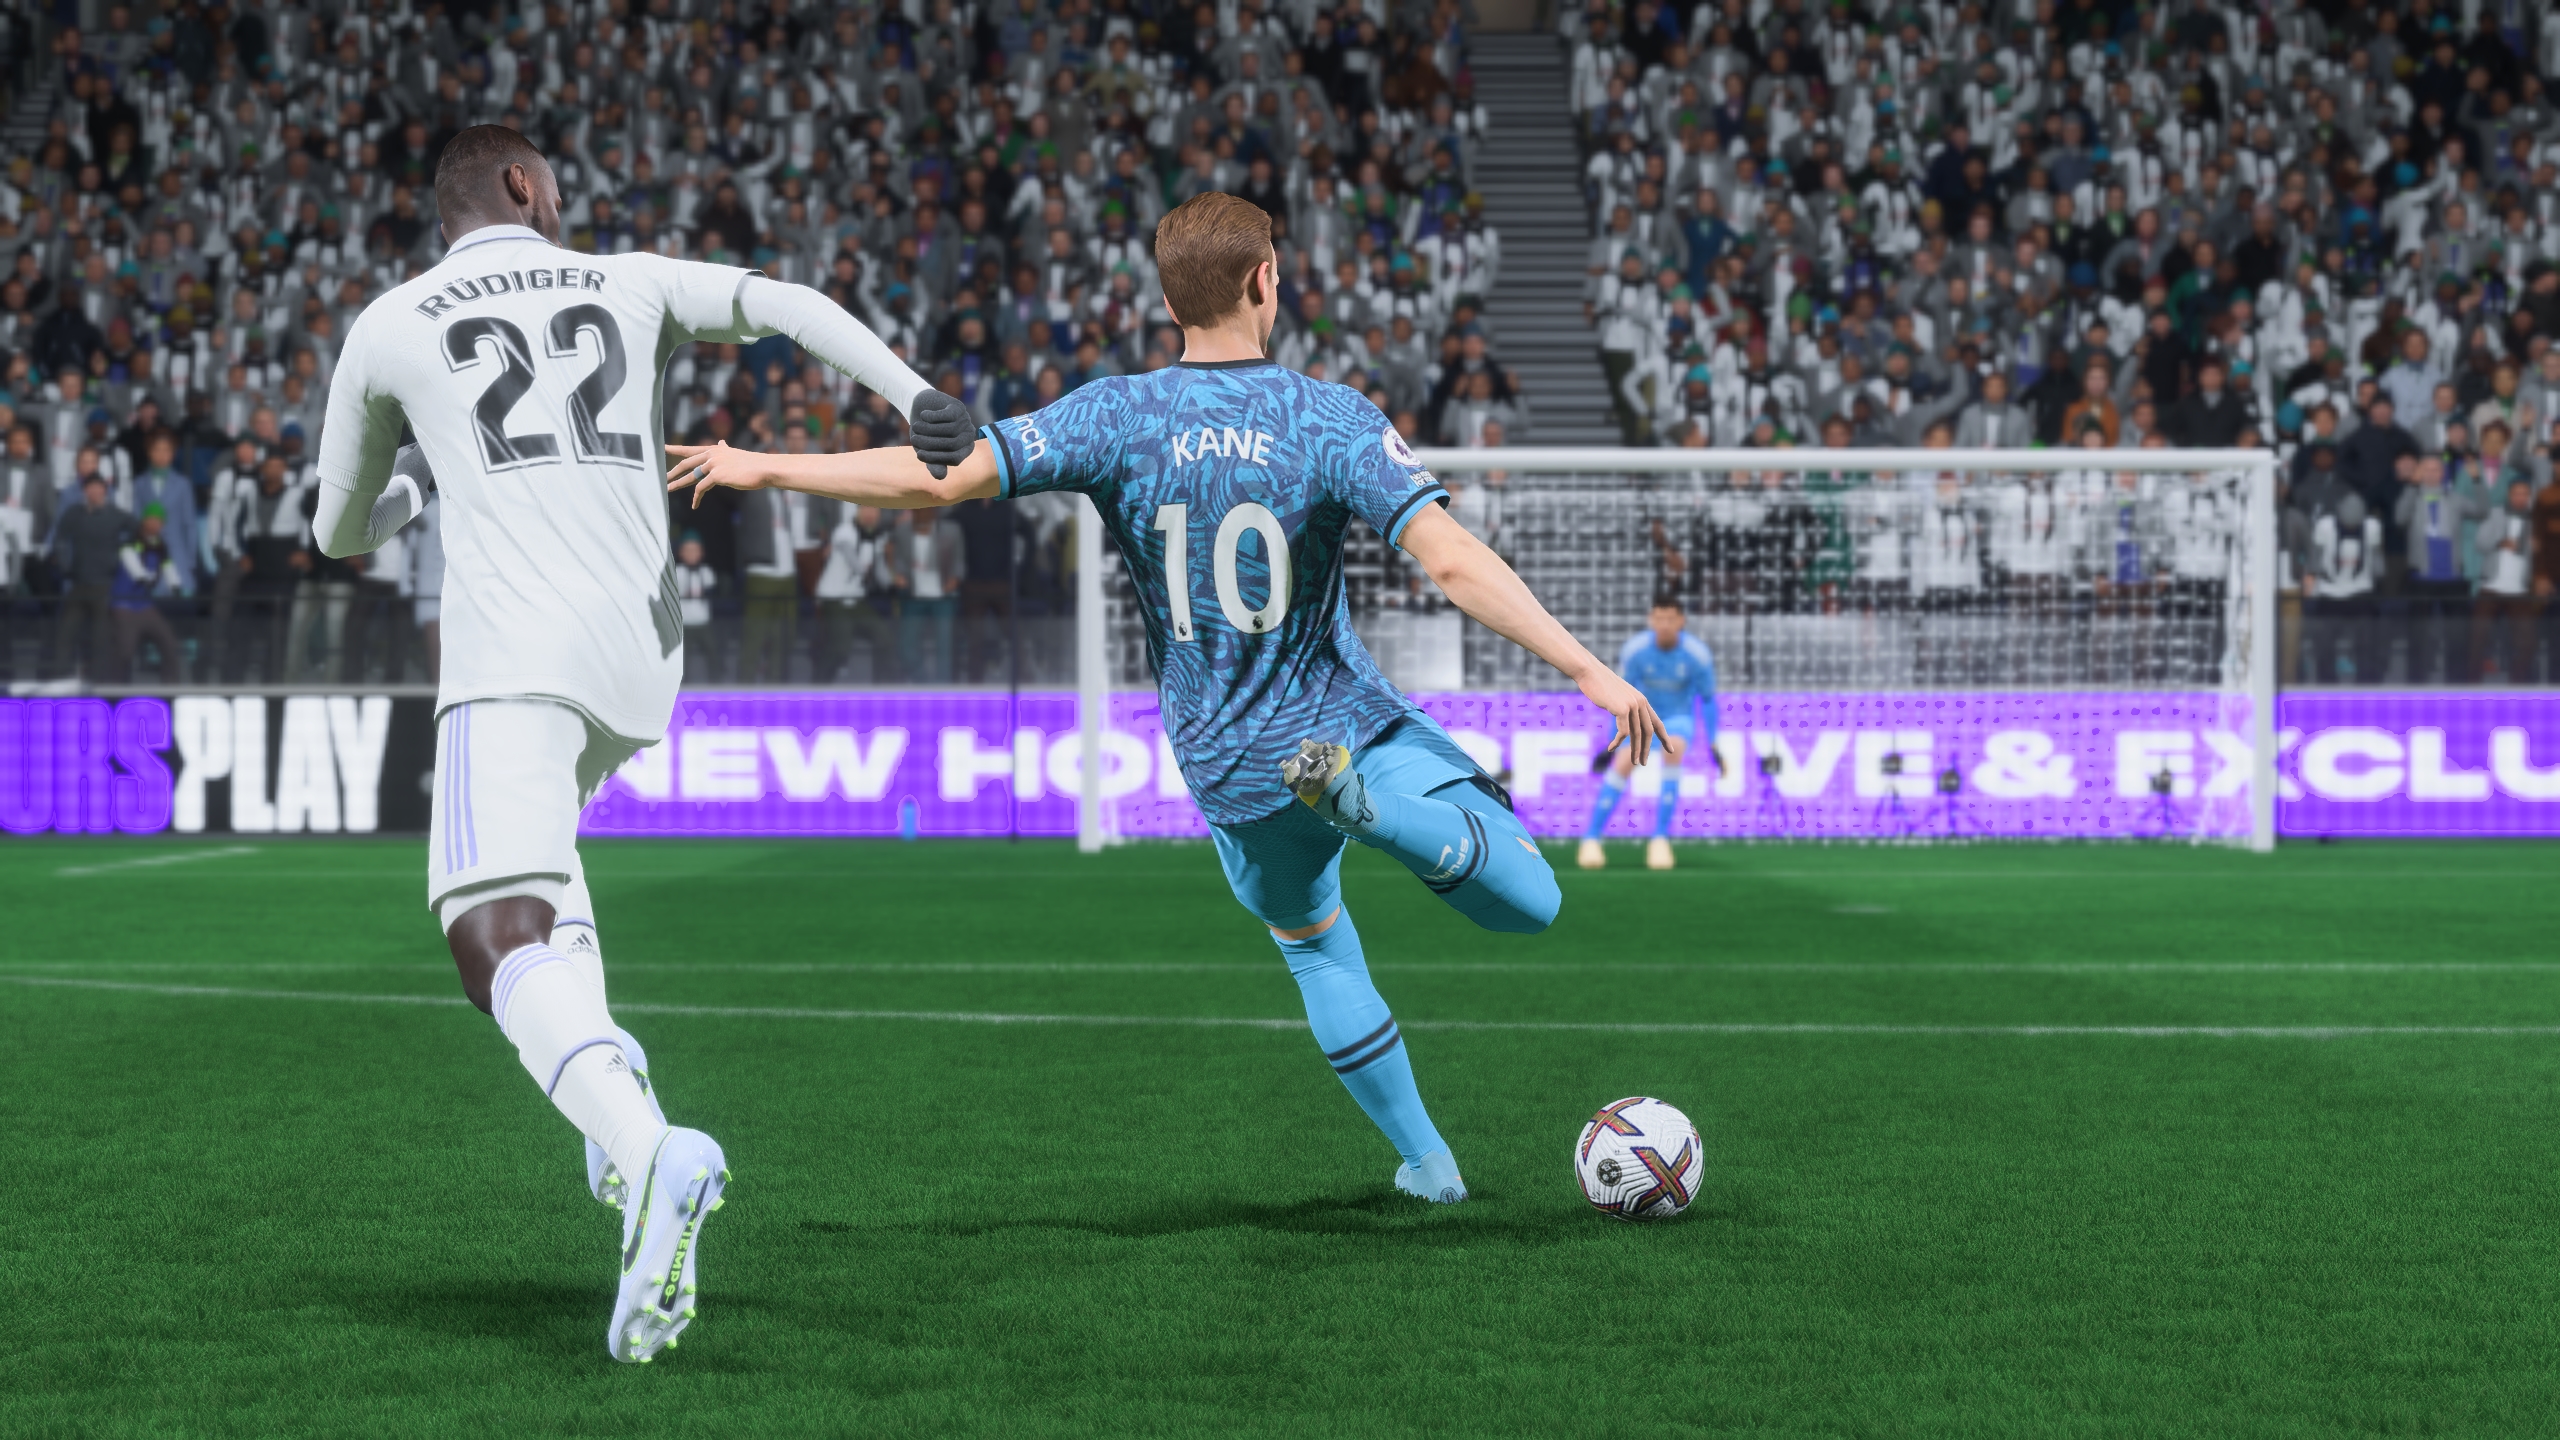 FIFA 22 Honorable Mentions: Full team leaked, dates & predictions